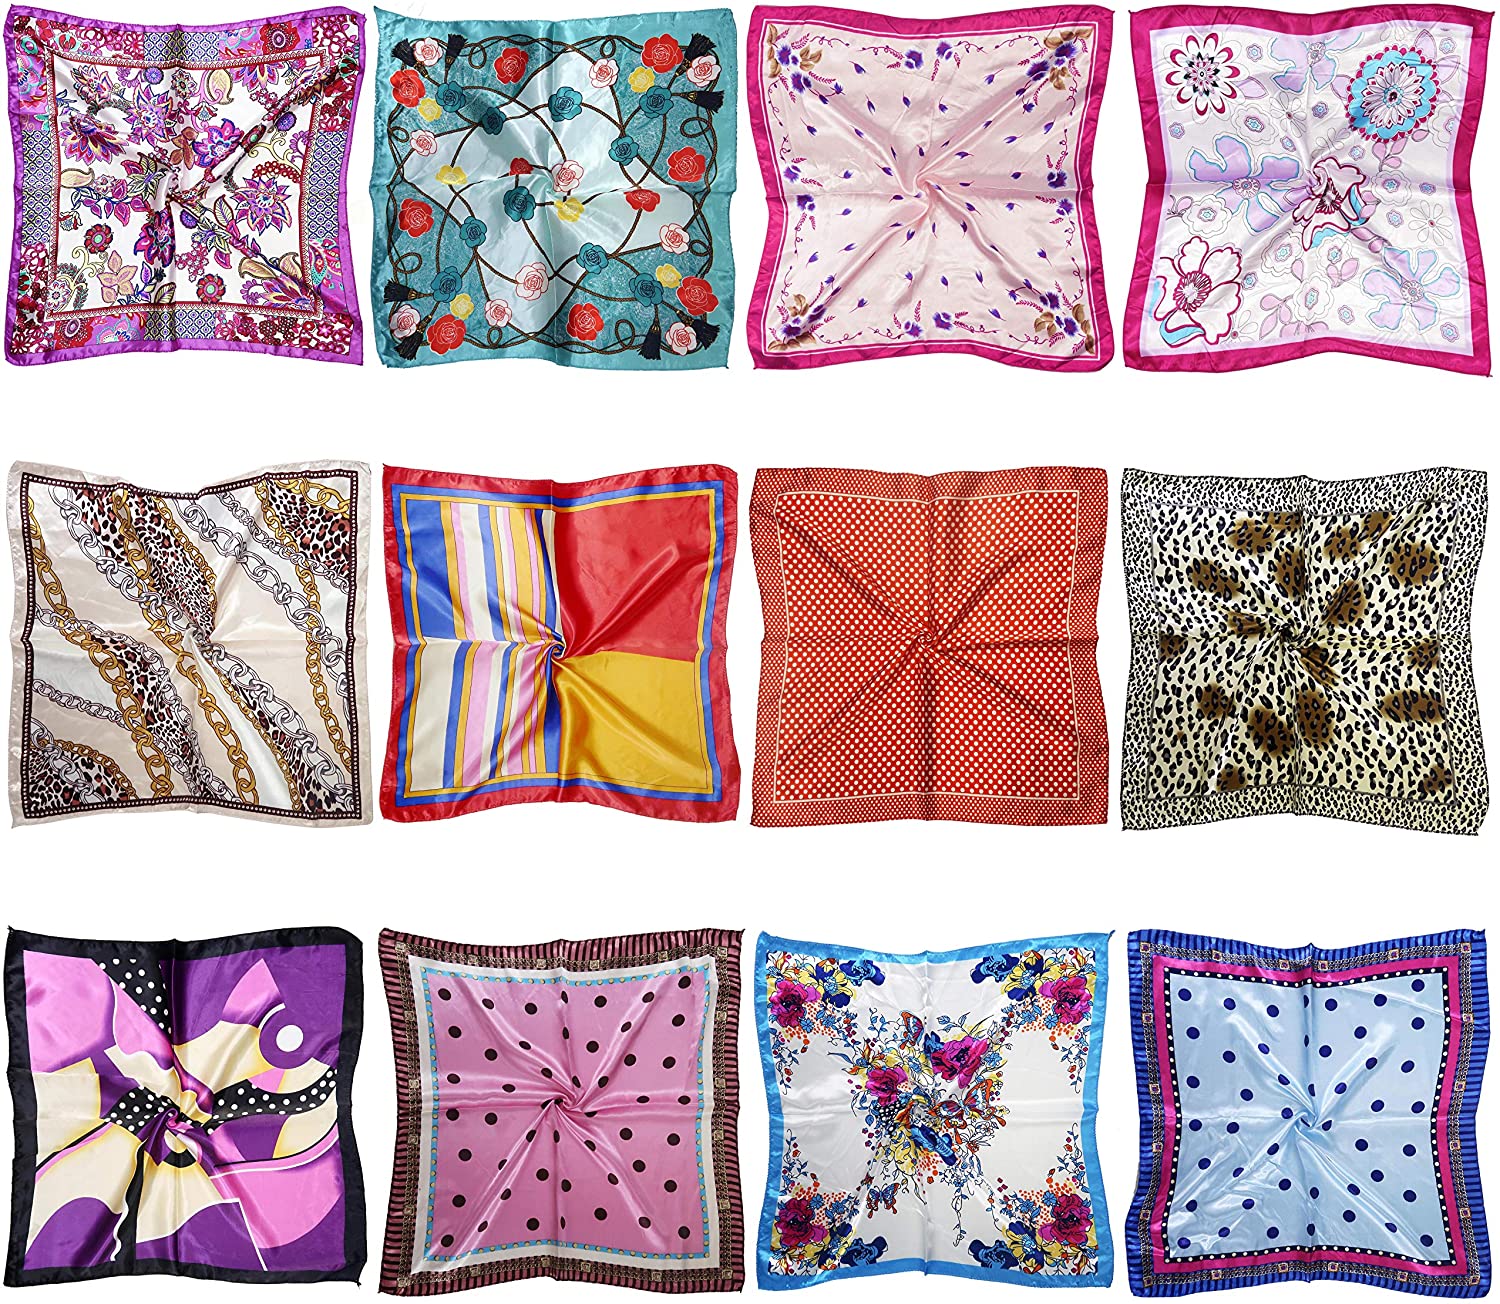 12 Set Mixed Designs Small Square Satin Womens Neck Head Scarf Scarves Bundle 